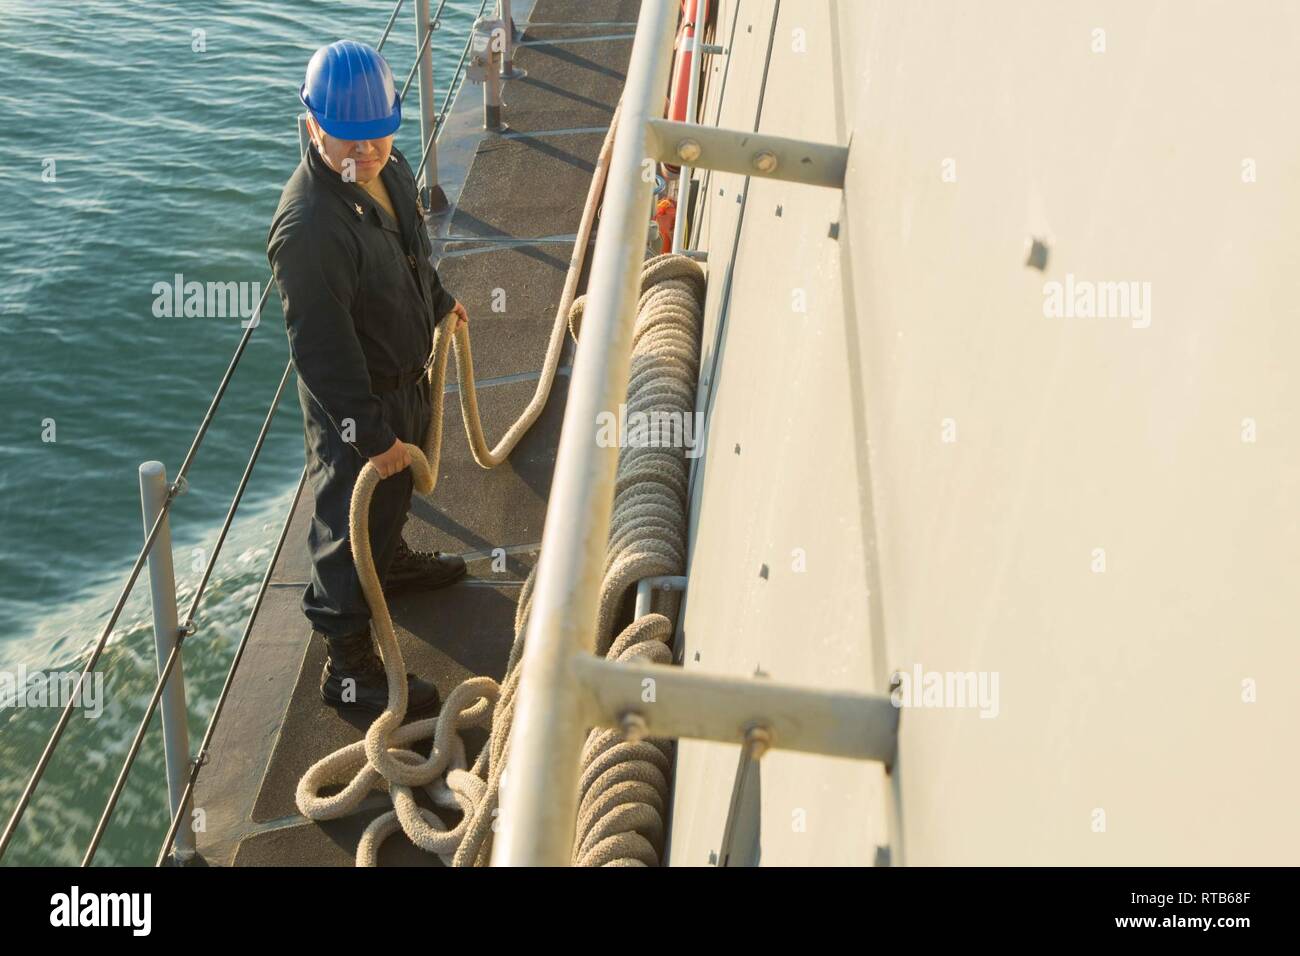 ARABIAN GULF (Feb. 7, 2019) Machinist Mate 2nd Class Oscar Rodriguez secures line aboard the Cyclone-class coastal patrol ship USS Thunderbolt (PC 12). Thunderbolt is forward deployed to the U.S. 5th Fleet area of operations in support of naval operations to ensure maritime stability and security in the Central region, connecting the Mediterranean and the Pacific through the western Indian Ocean and three strategic choke points. Stock Photo